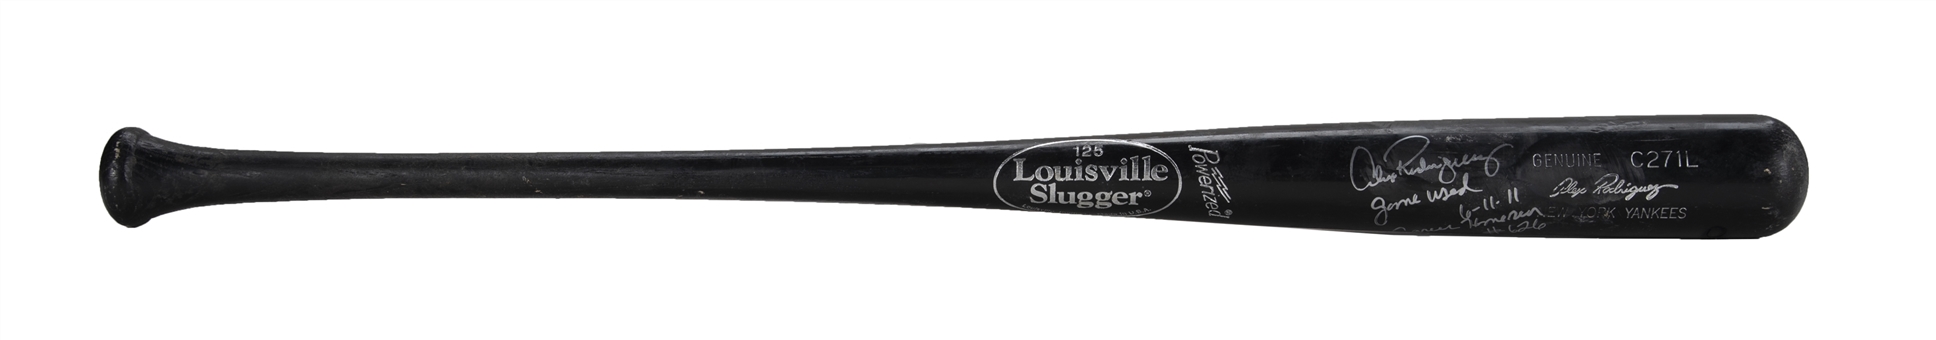 2011 Alex Rodriguez Game Used & Signed Louisville Slugger C271L Model Bat Used For Career Home Run #626 (Rodriguez LOA & MLB Authenticated)